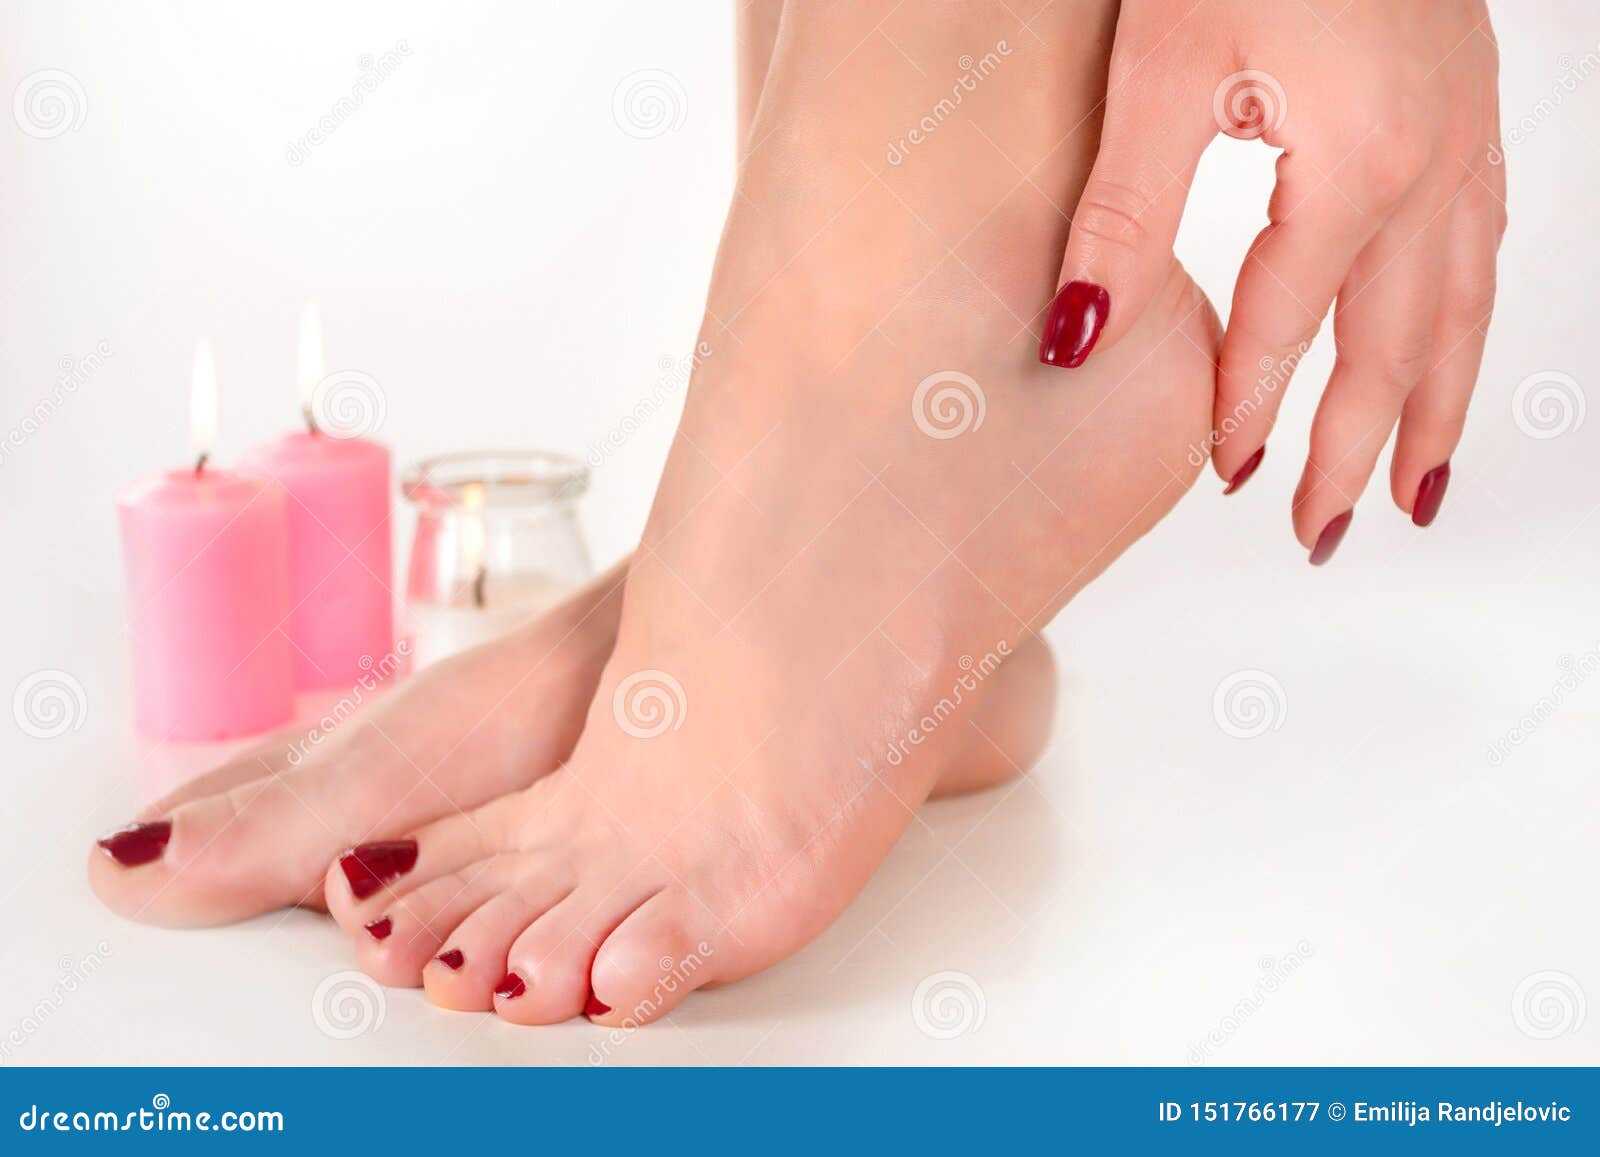 Foot problems and pain during menopause - Scholl UK